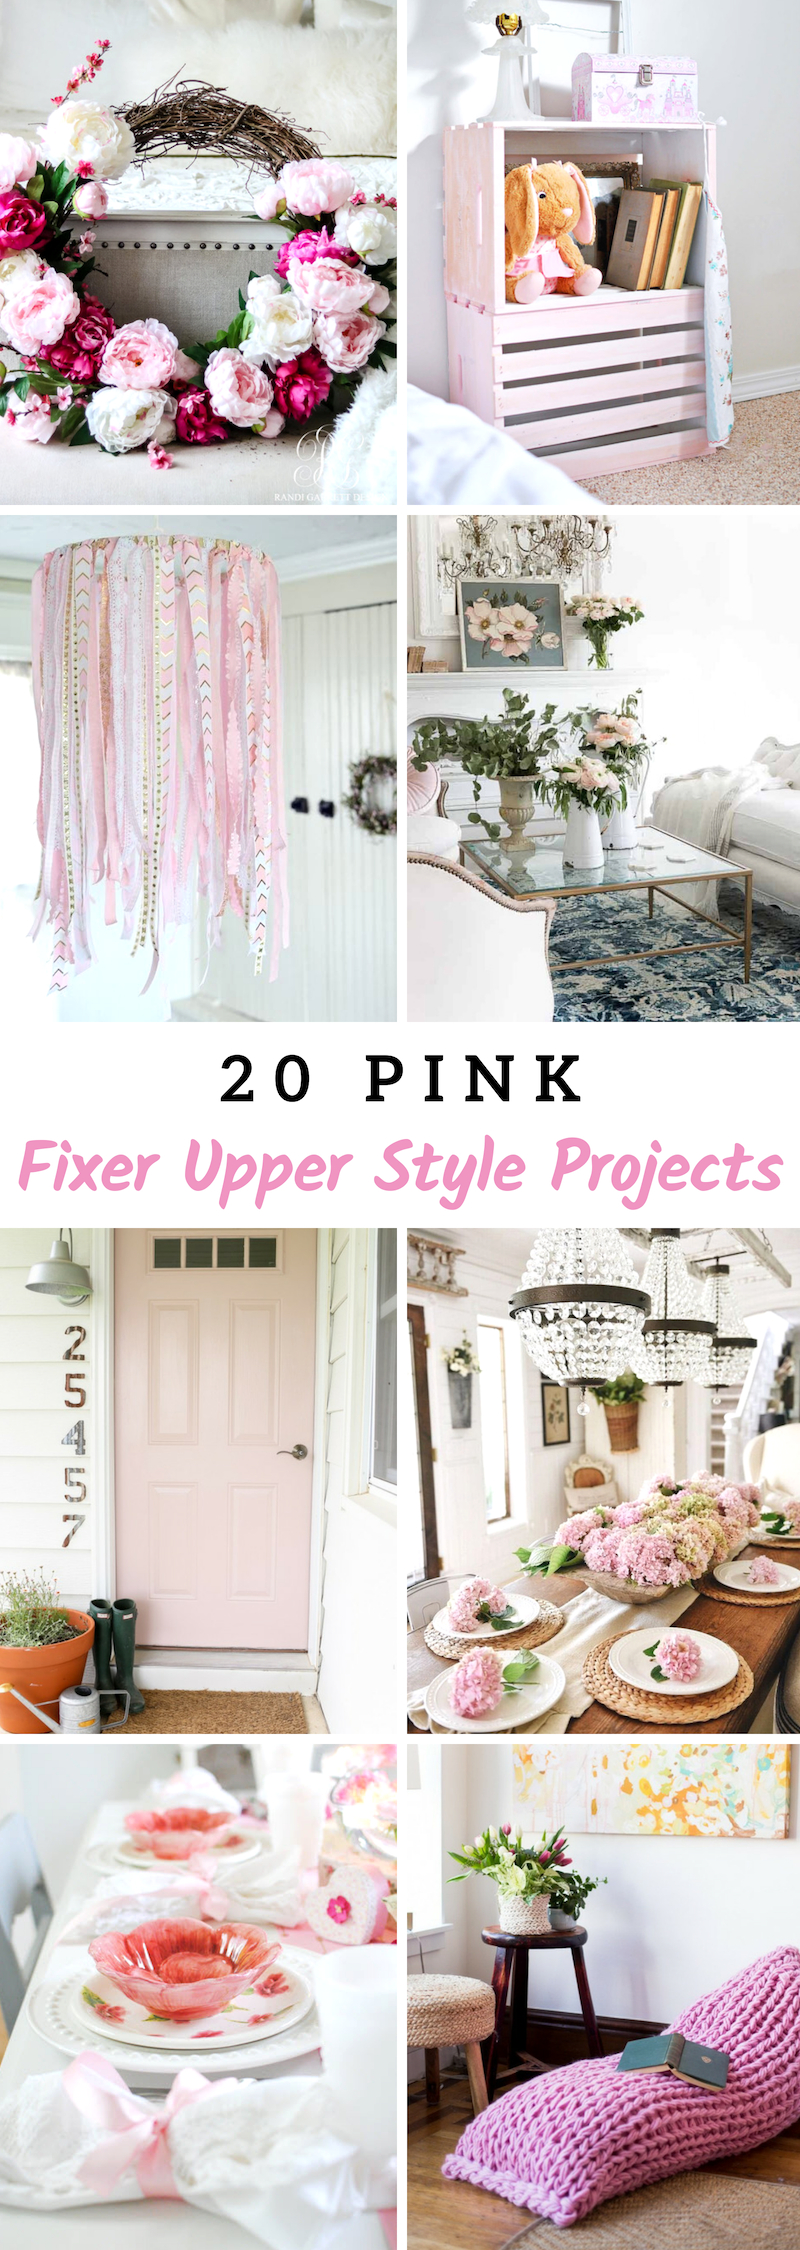 Pink Fixer Upper Style Projects 